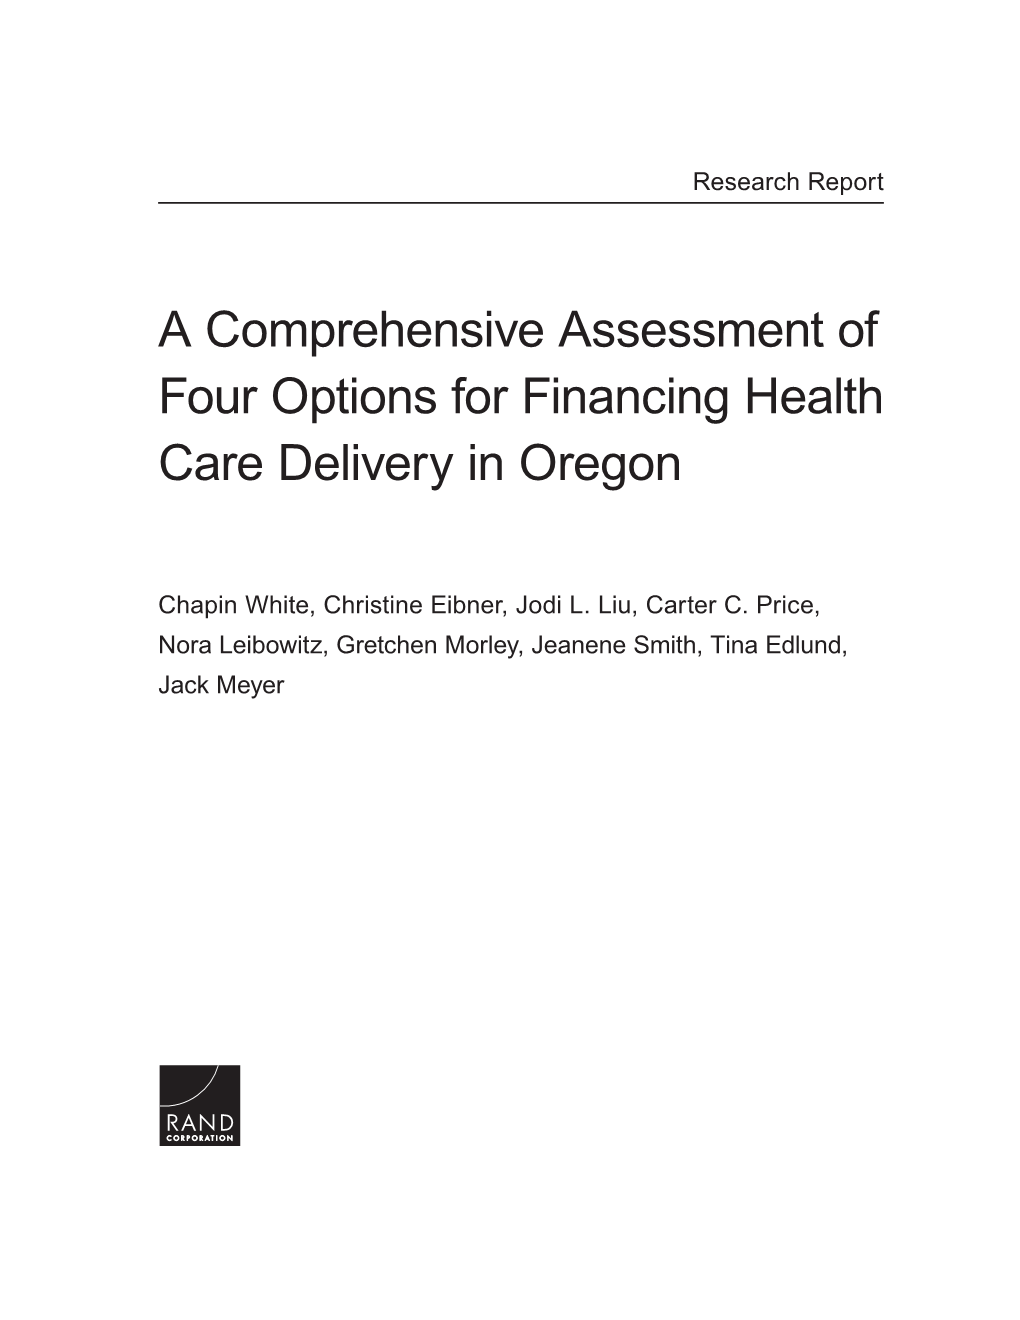 A Comprehensive Assessment of Four Options for Financing Health Care Delivery in Oregon